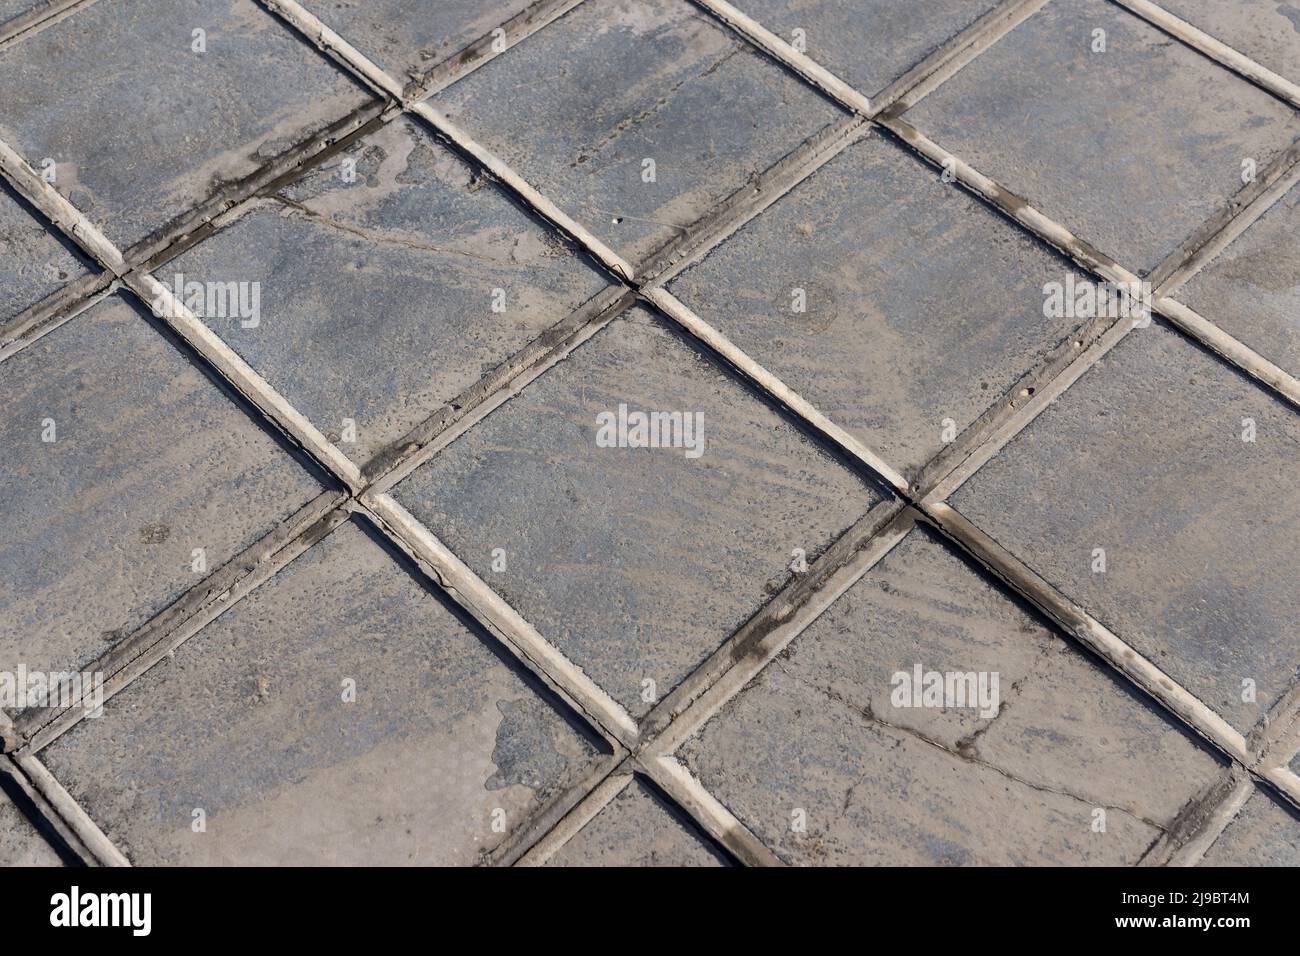 concrete tile for outdoor use Sidewalks, non-slip and wear resistance paving with tile Dirty and broken hydraulic tiles, pattern detail Stock Photo